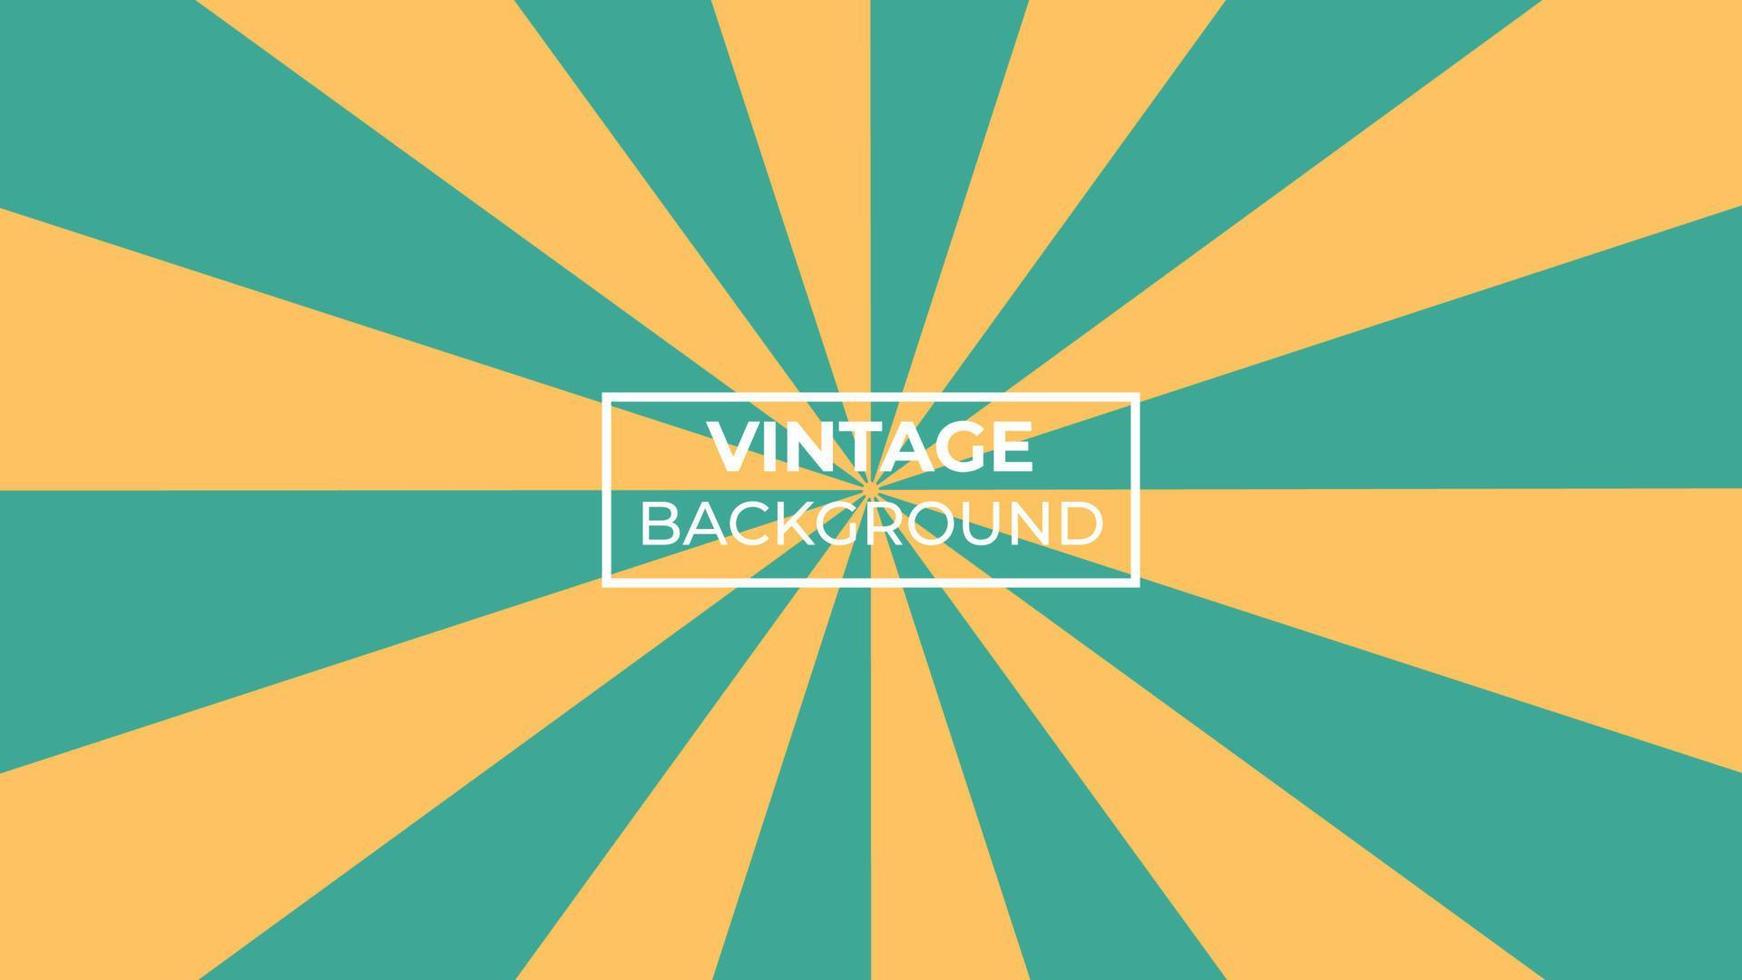 vintage background in orange, dark yellow and red with horizontal wave pattern. eps 10. easy edit vector